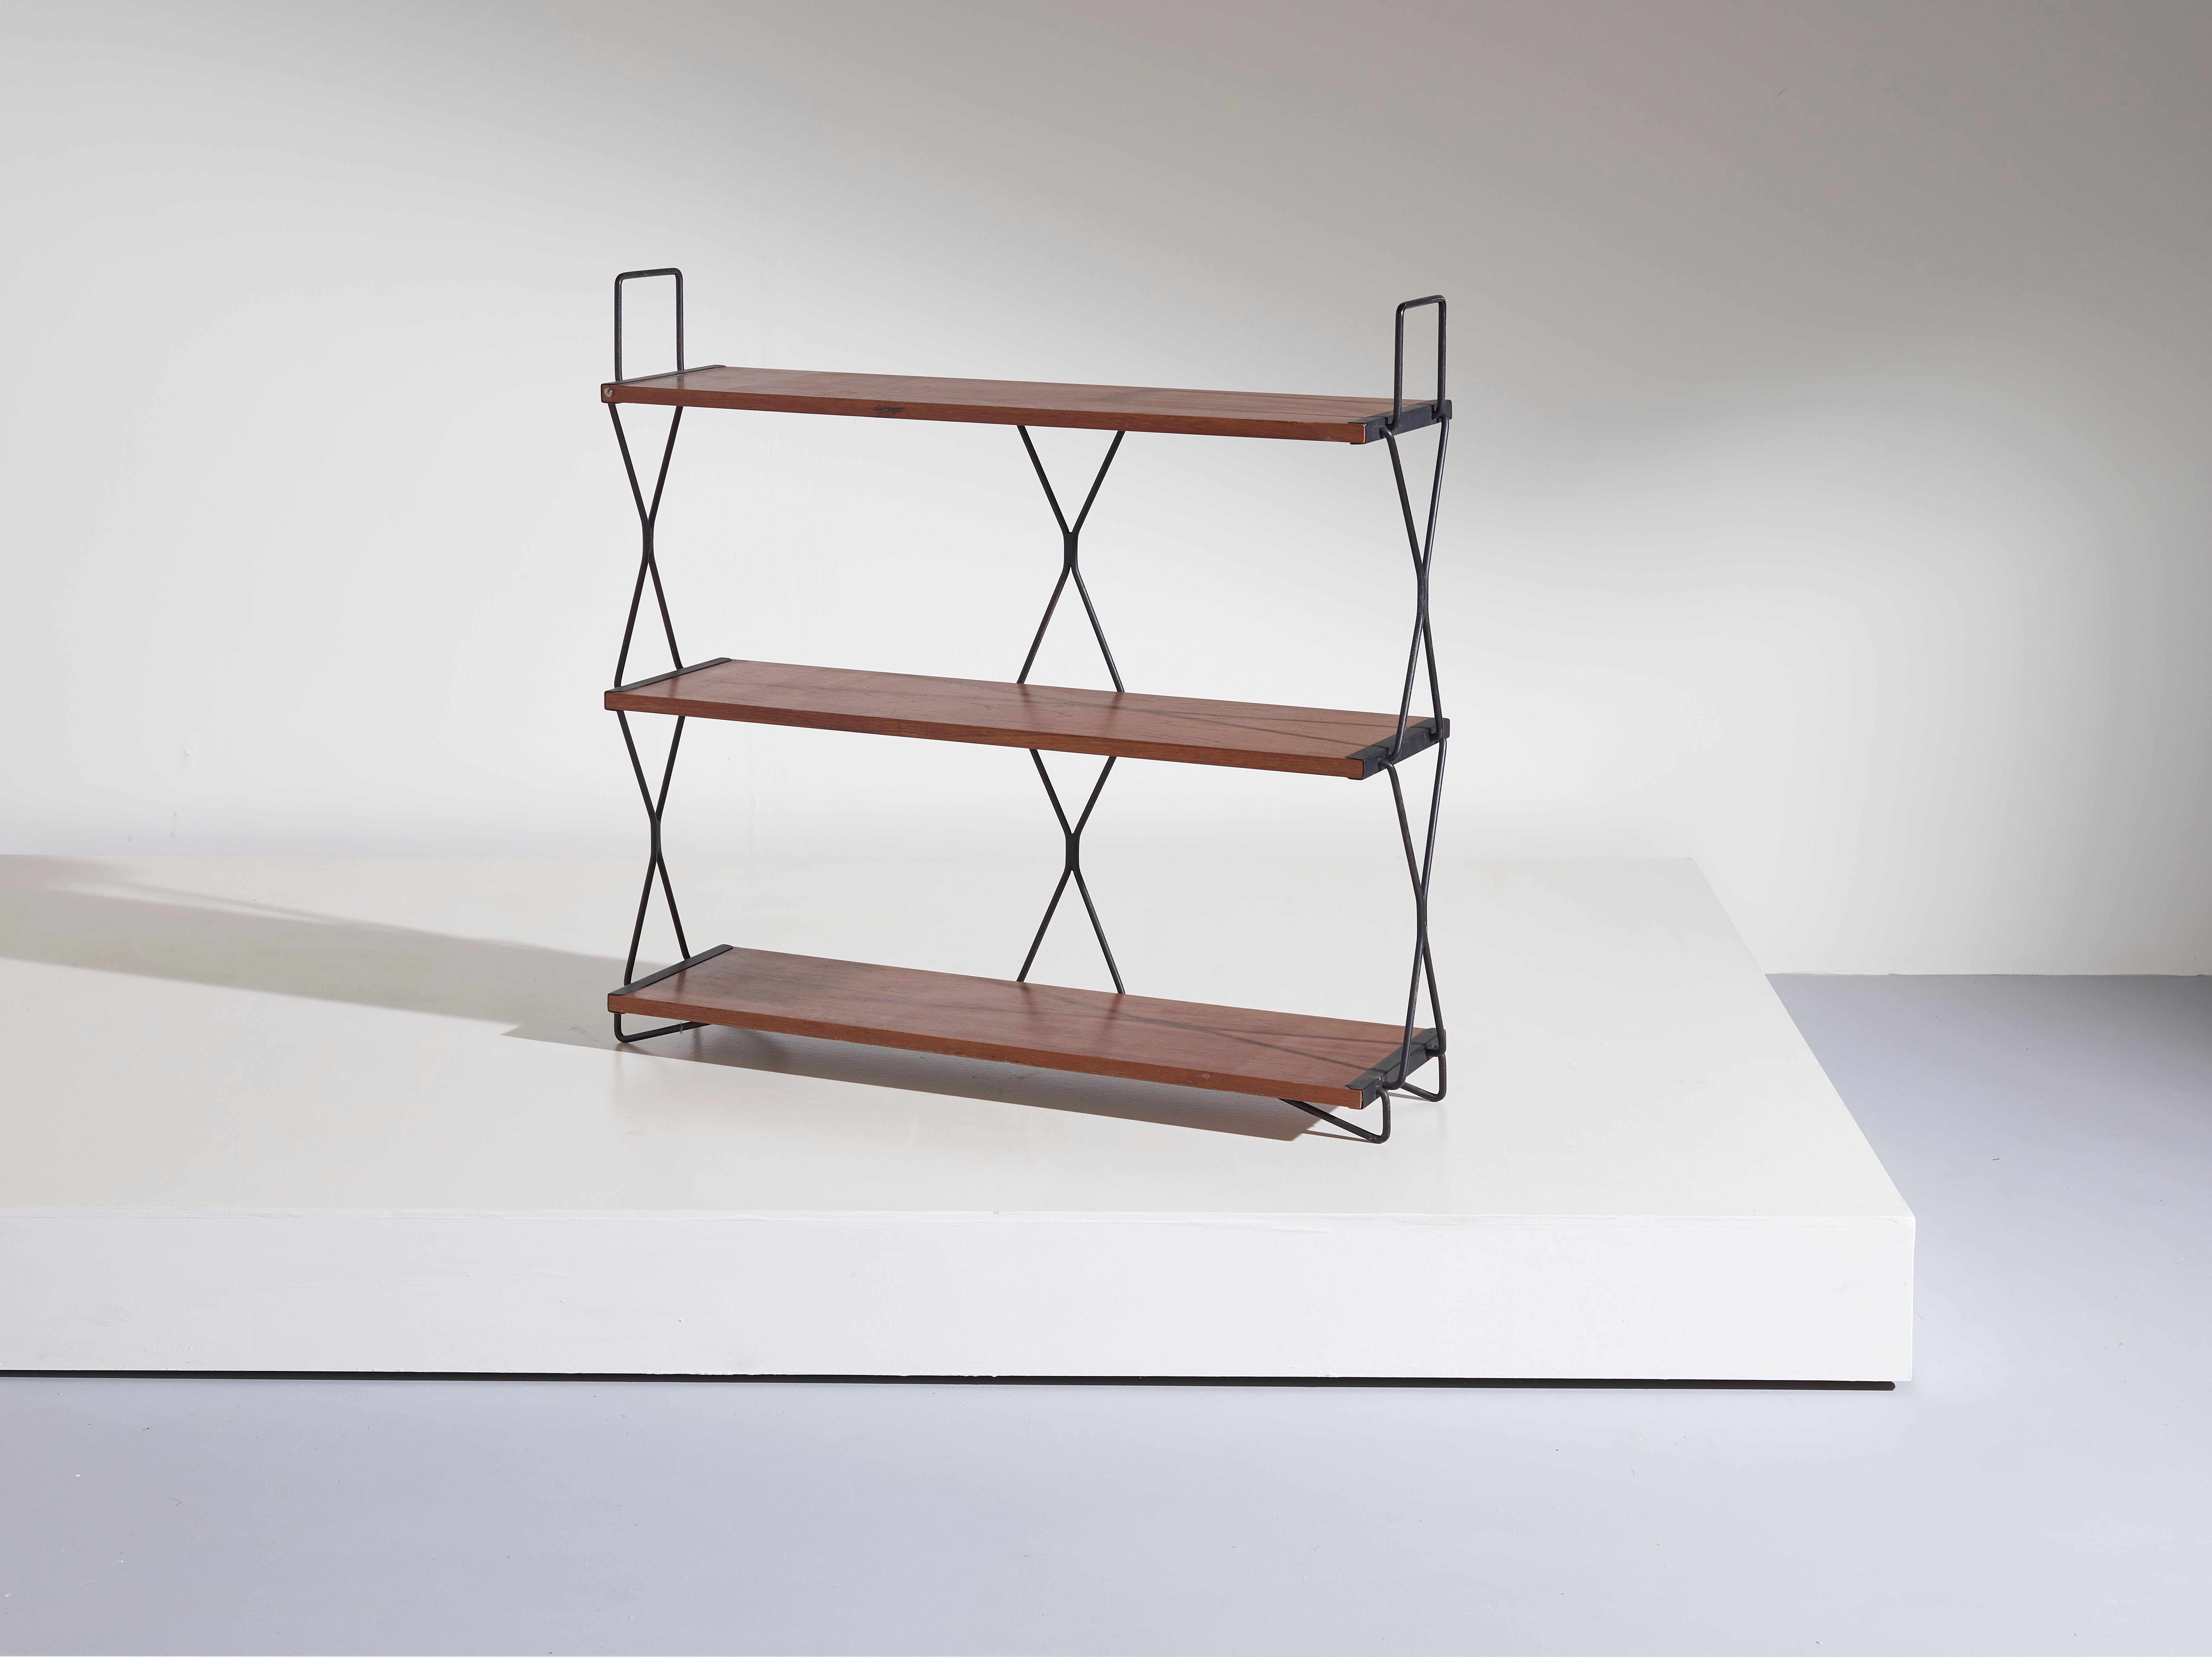 A bookshelf made by Isa Bergamo during the 1950’s with a linear and functional design. 
Made in teak and black painted iron its style and measures perfectly fits modern home environments.

Dimensions: 24.5 x 94 x 86 cm [DxWxH]

Condition: Wear